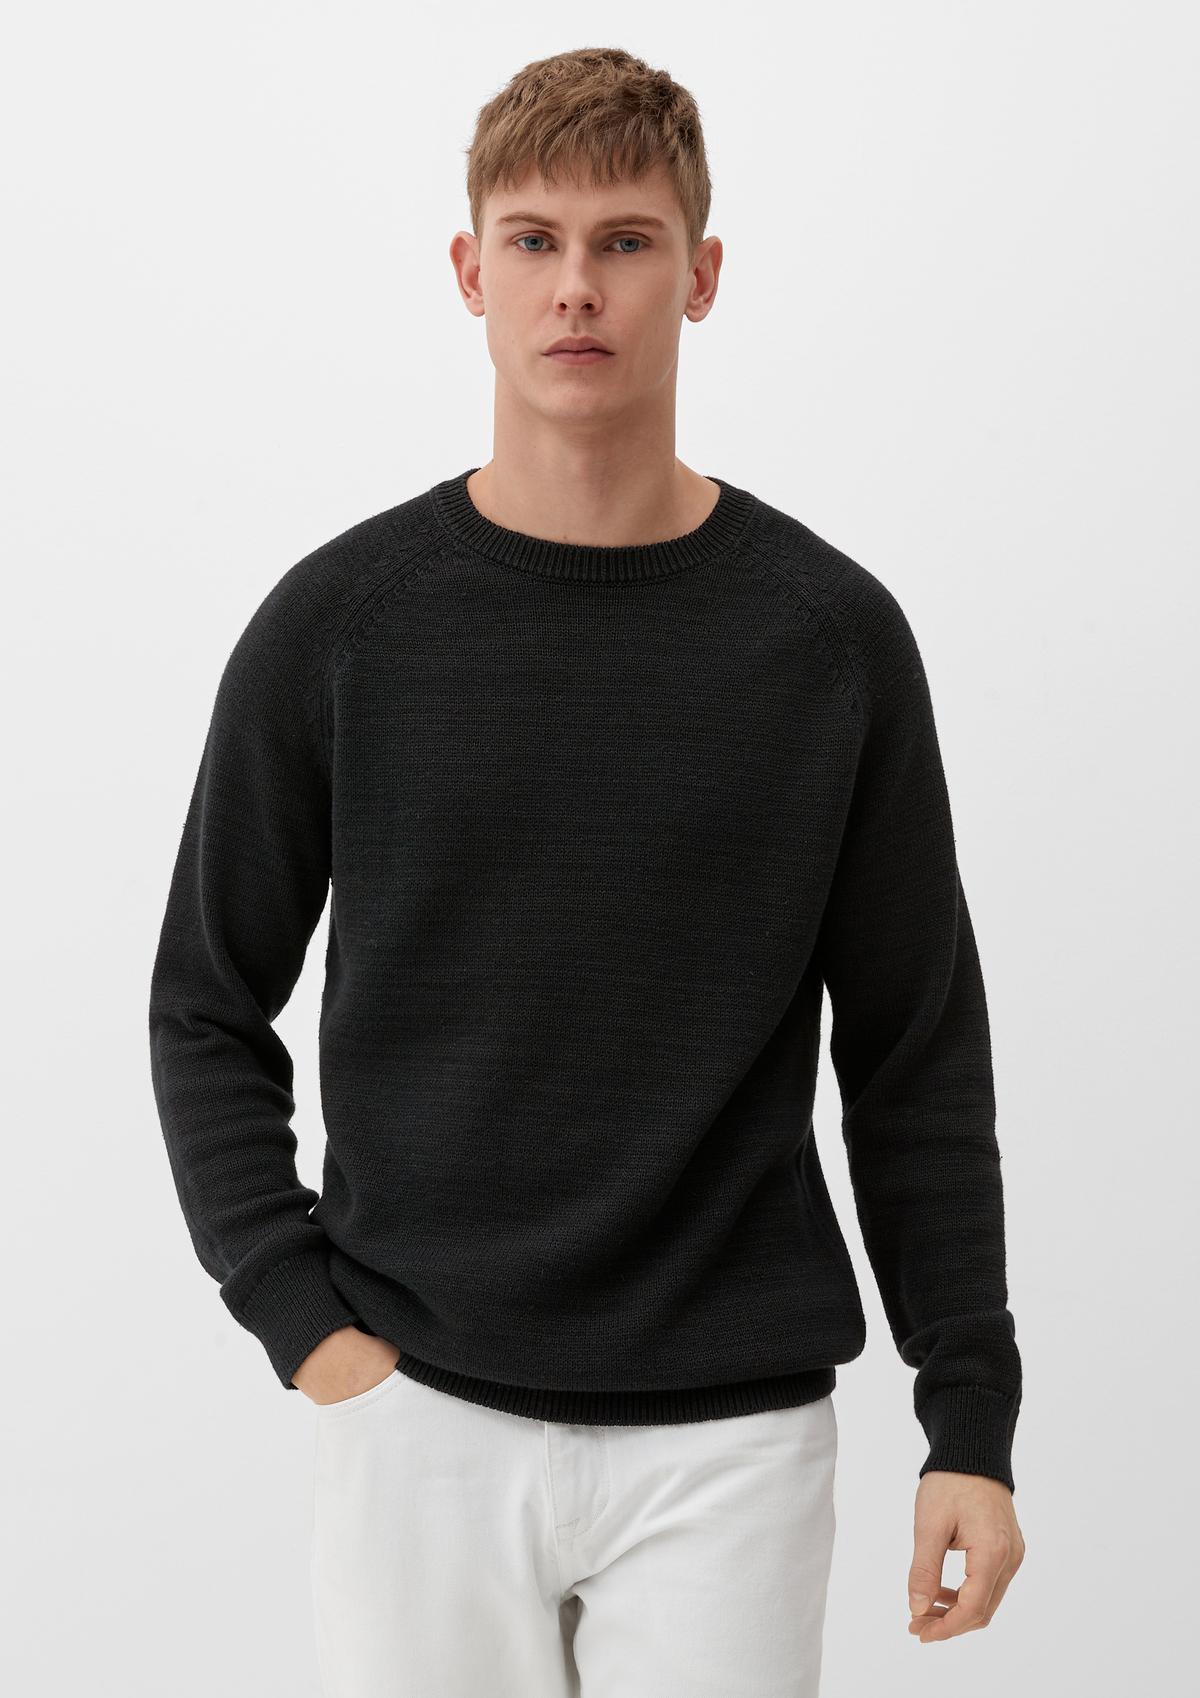 Knitted jumper with light sleeves - olive raglan